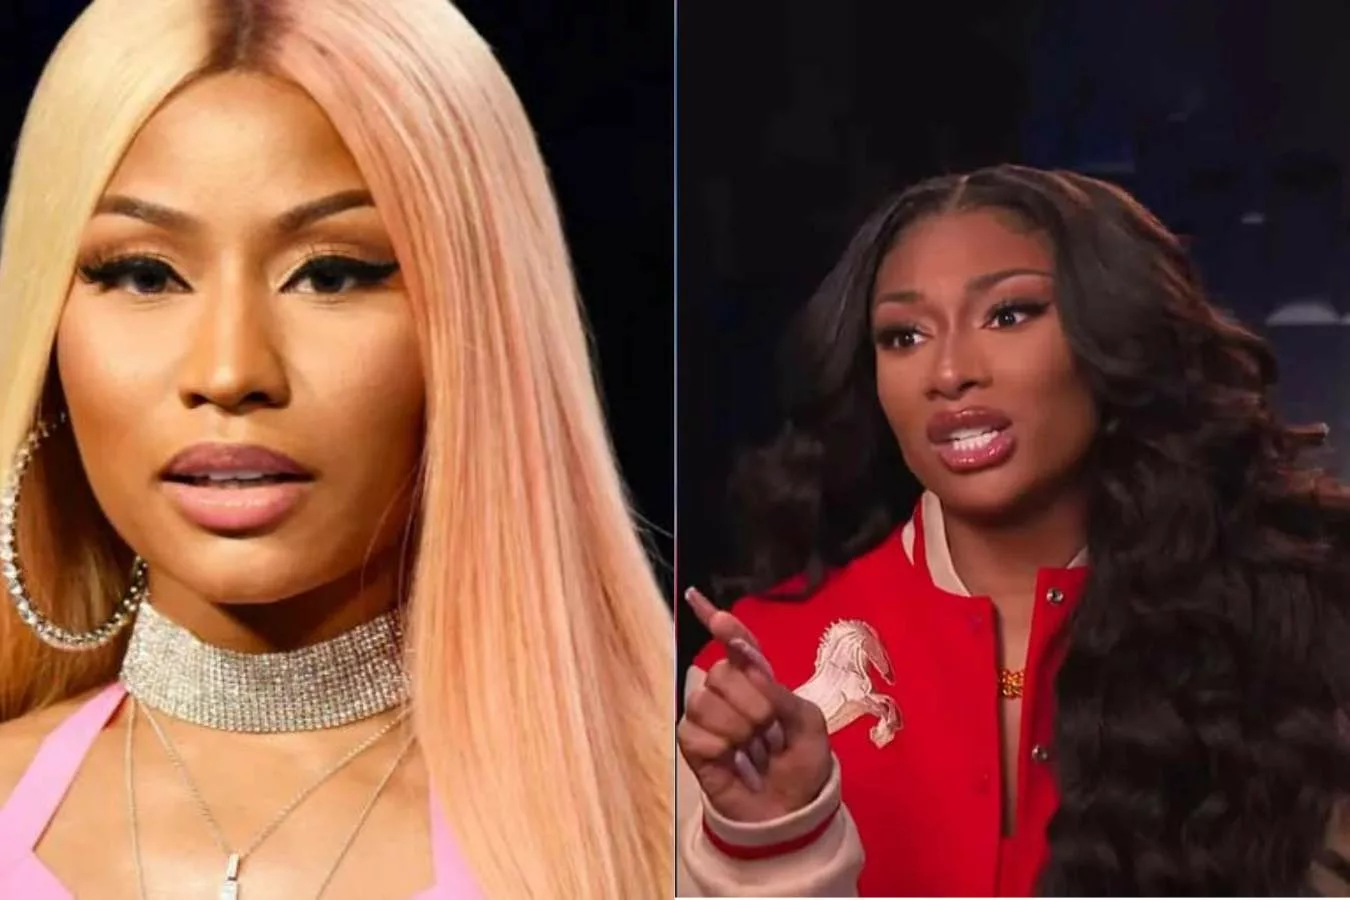 Megan Thee Stallion and Nicki Minaj Feud Escalates As the Former Releases 'Hiss,' Check Full Controversy Here